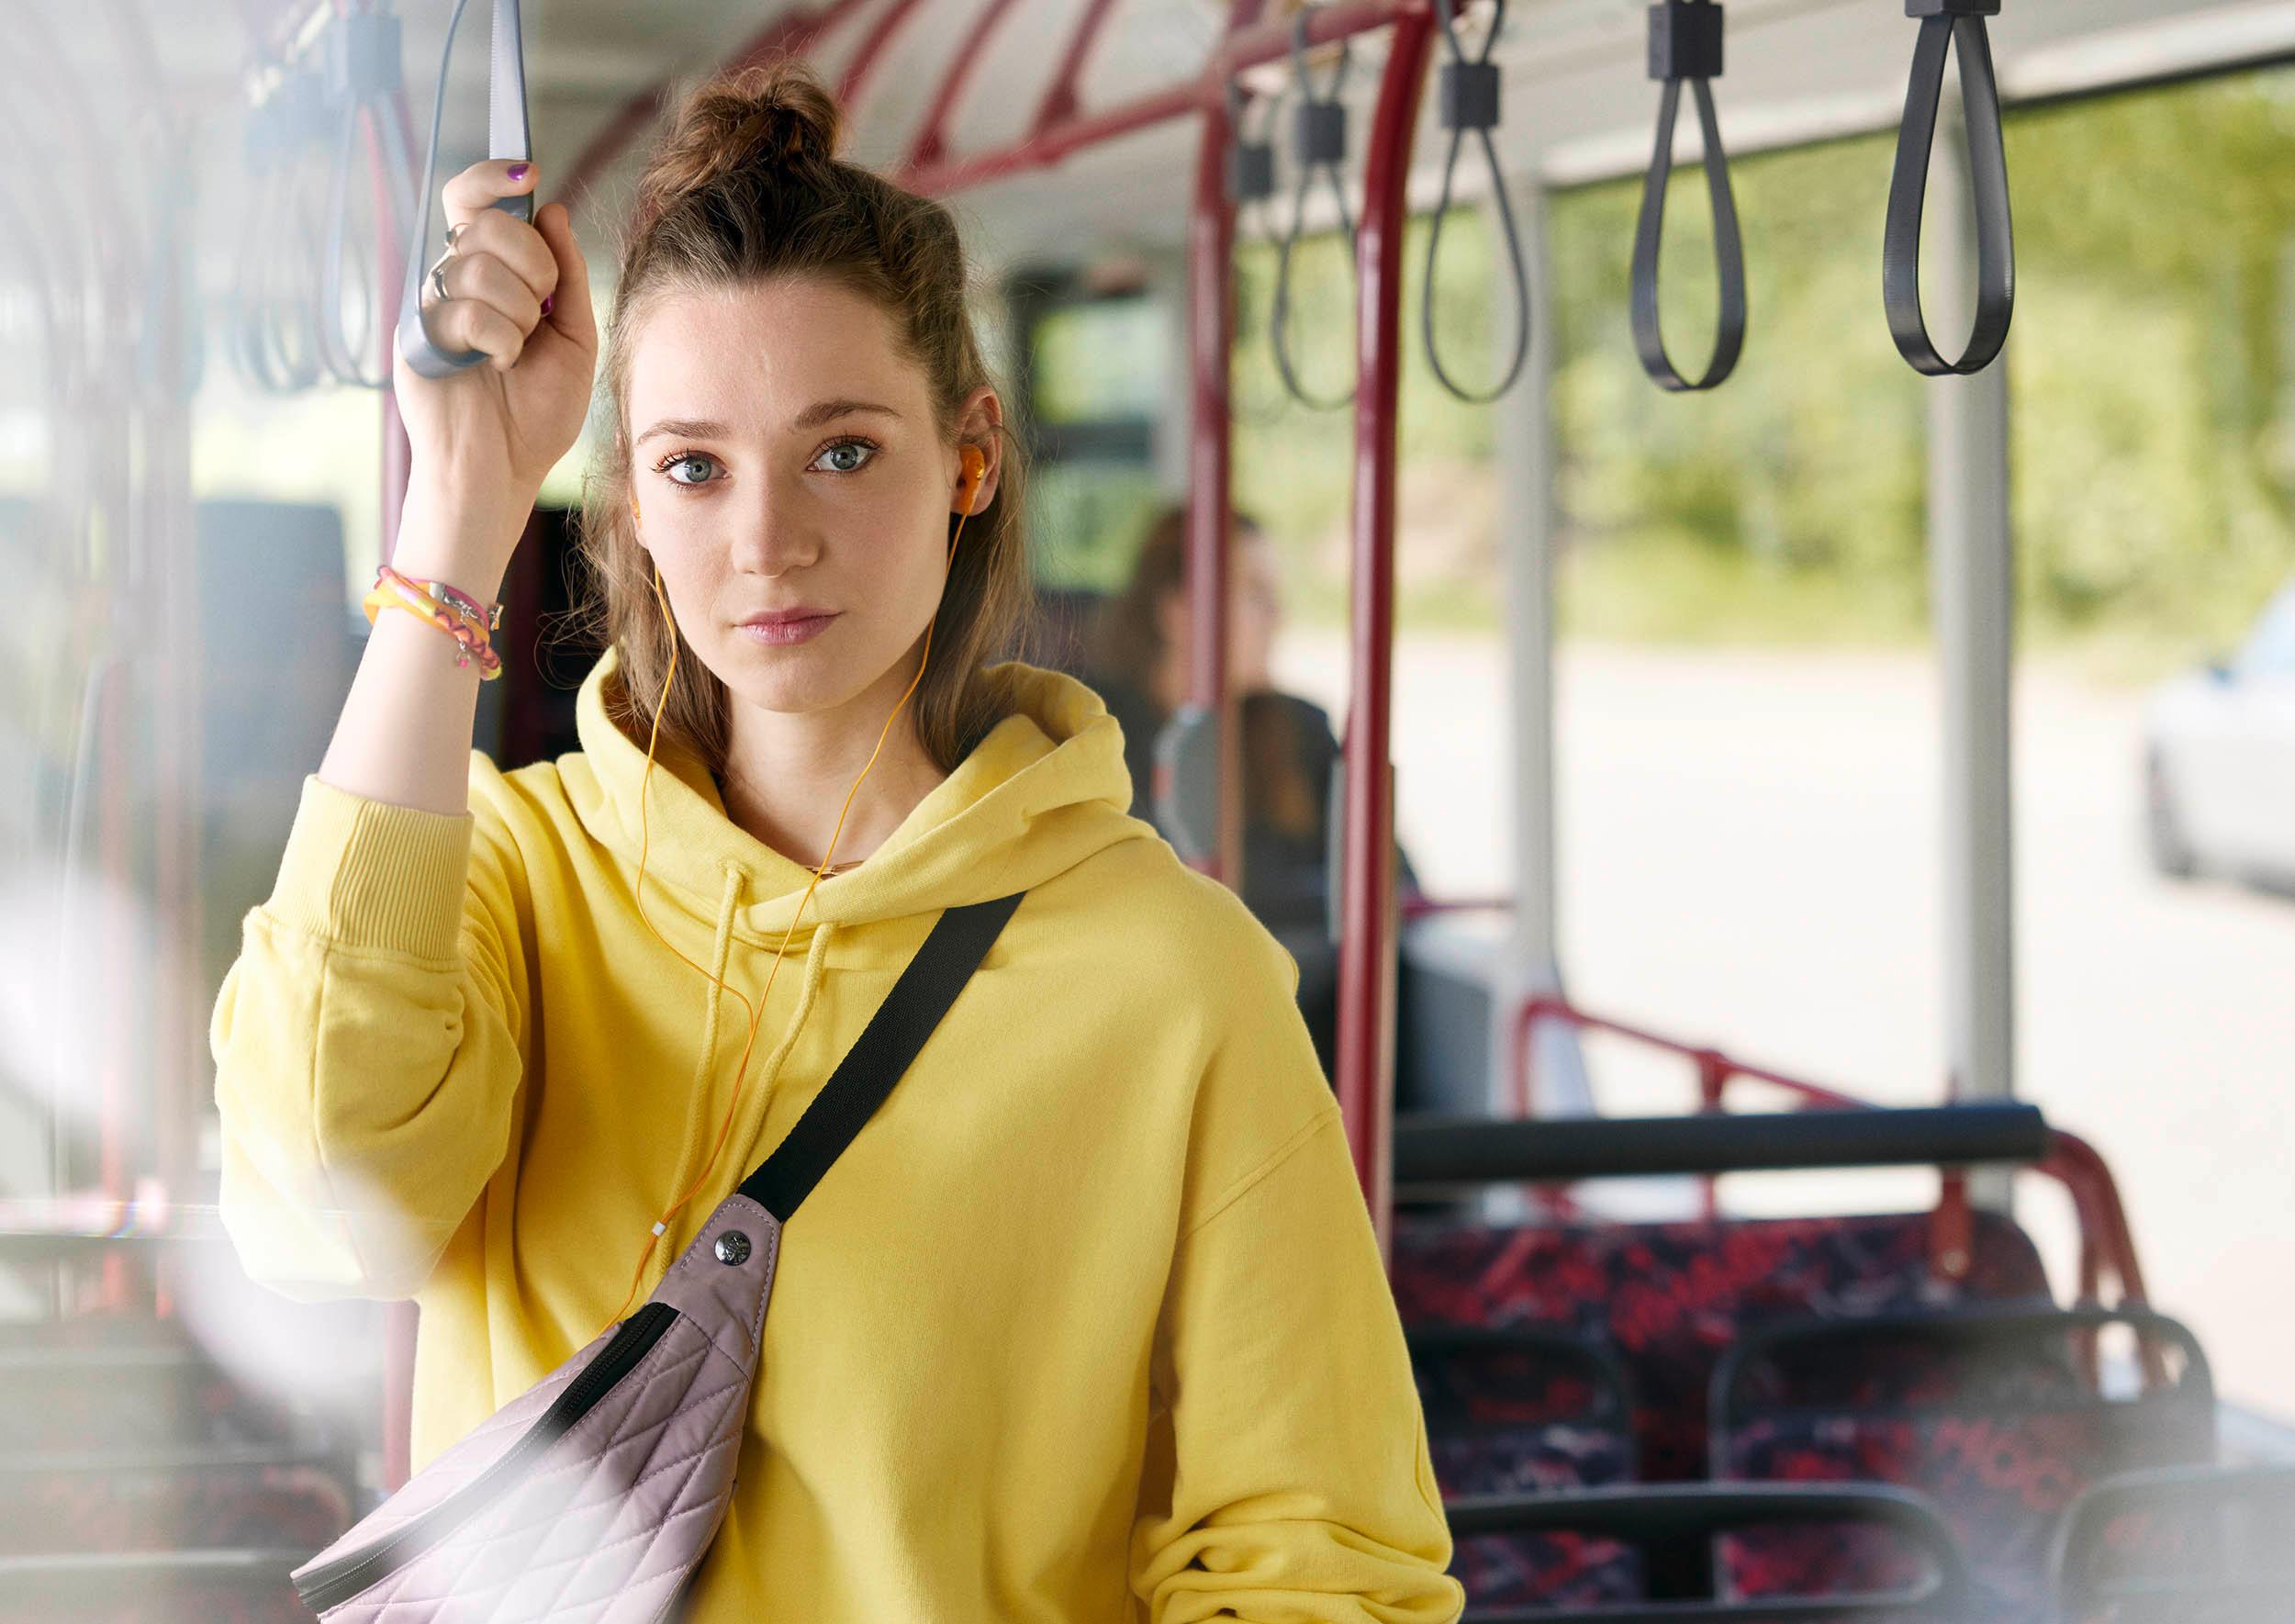 Photo: Young woman holds a grab handle standing in the bus, front shot